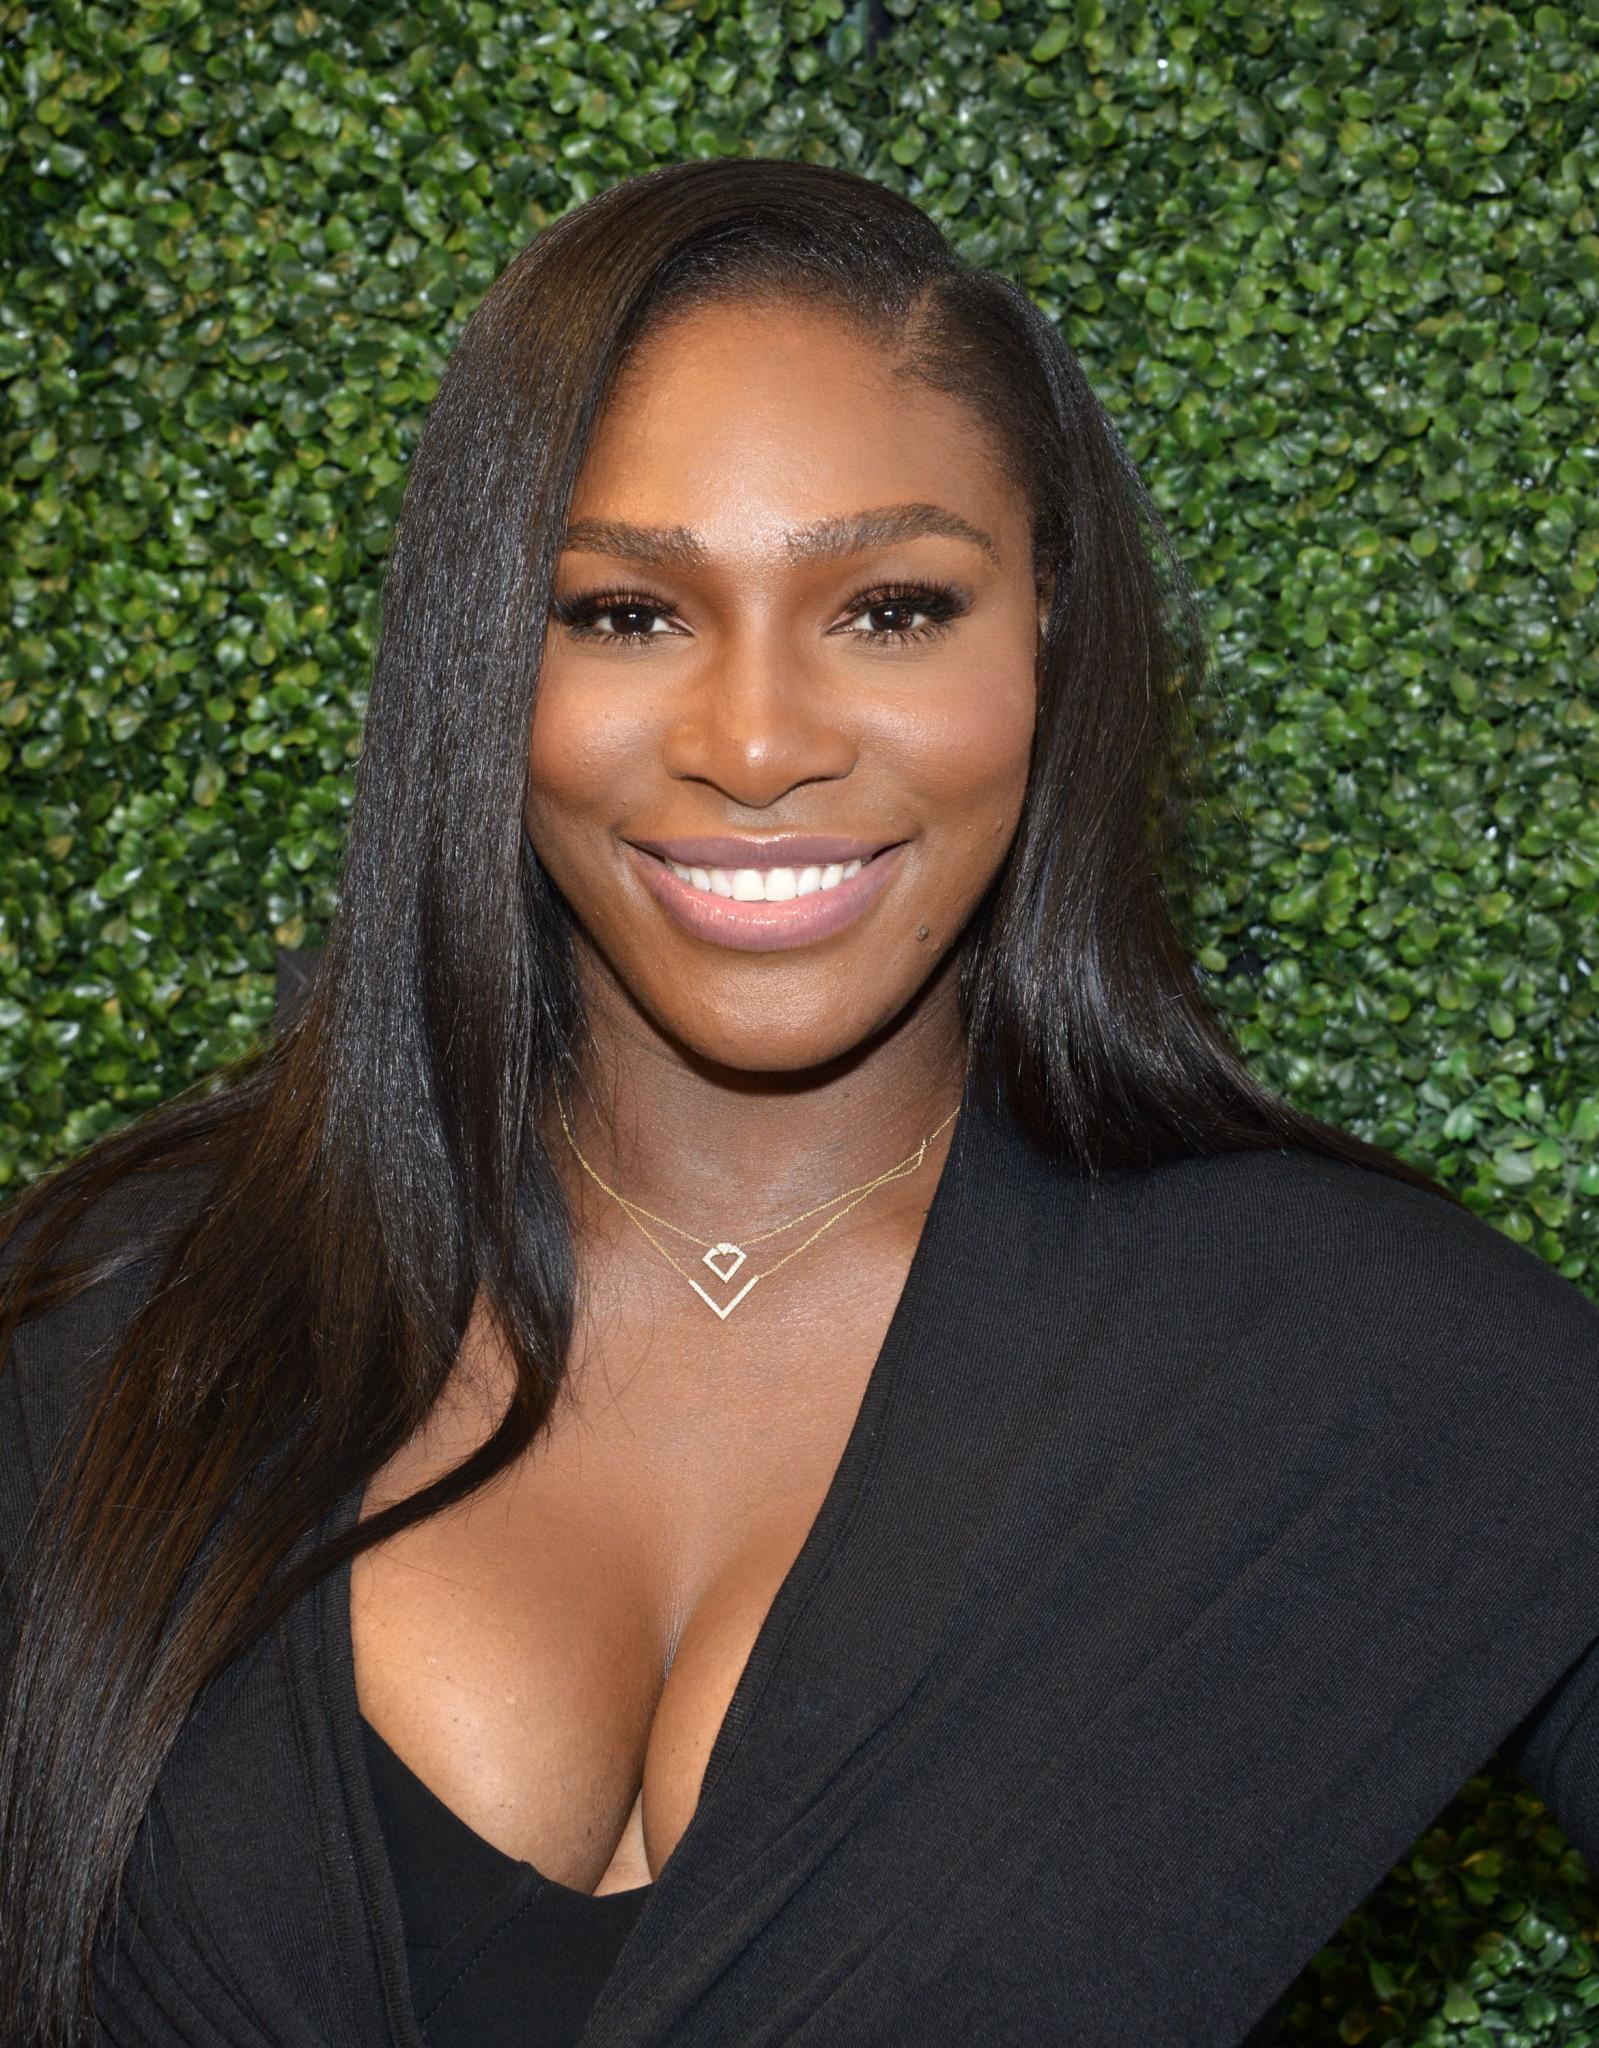 Serena Williams to Black Lives Matter Activists: 'Keep It Up, Don't Let Those Trolls Stop You'